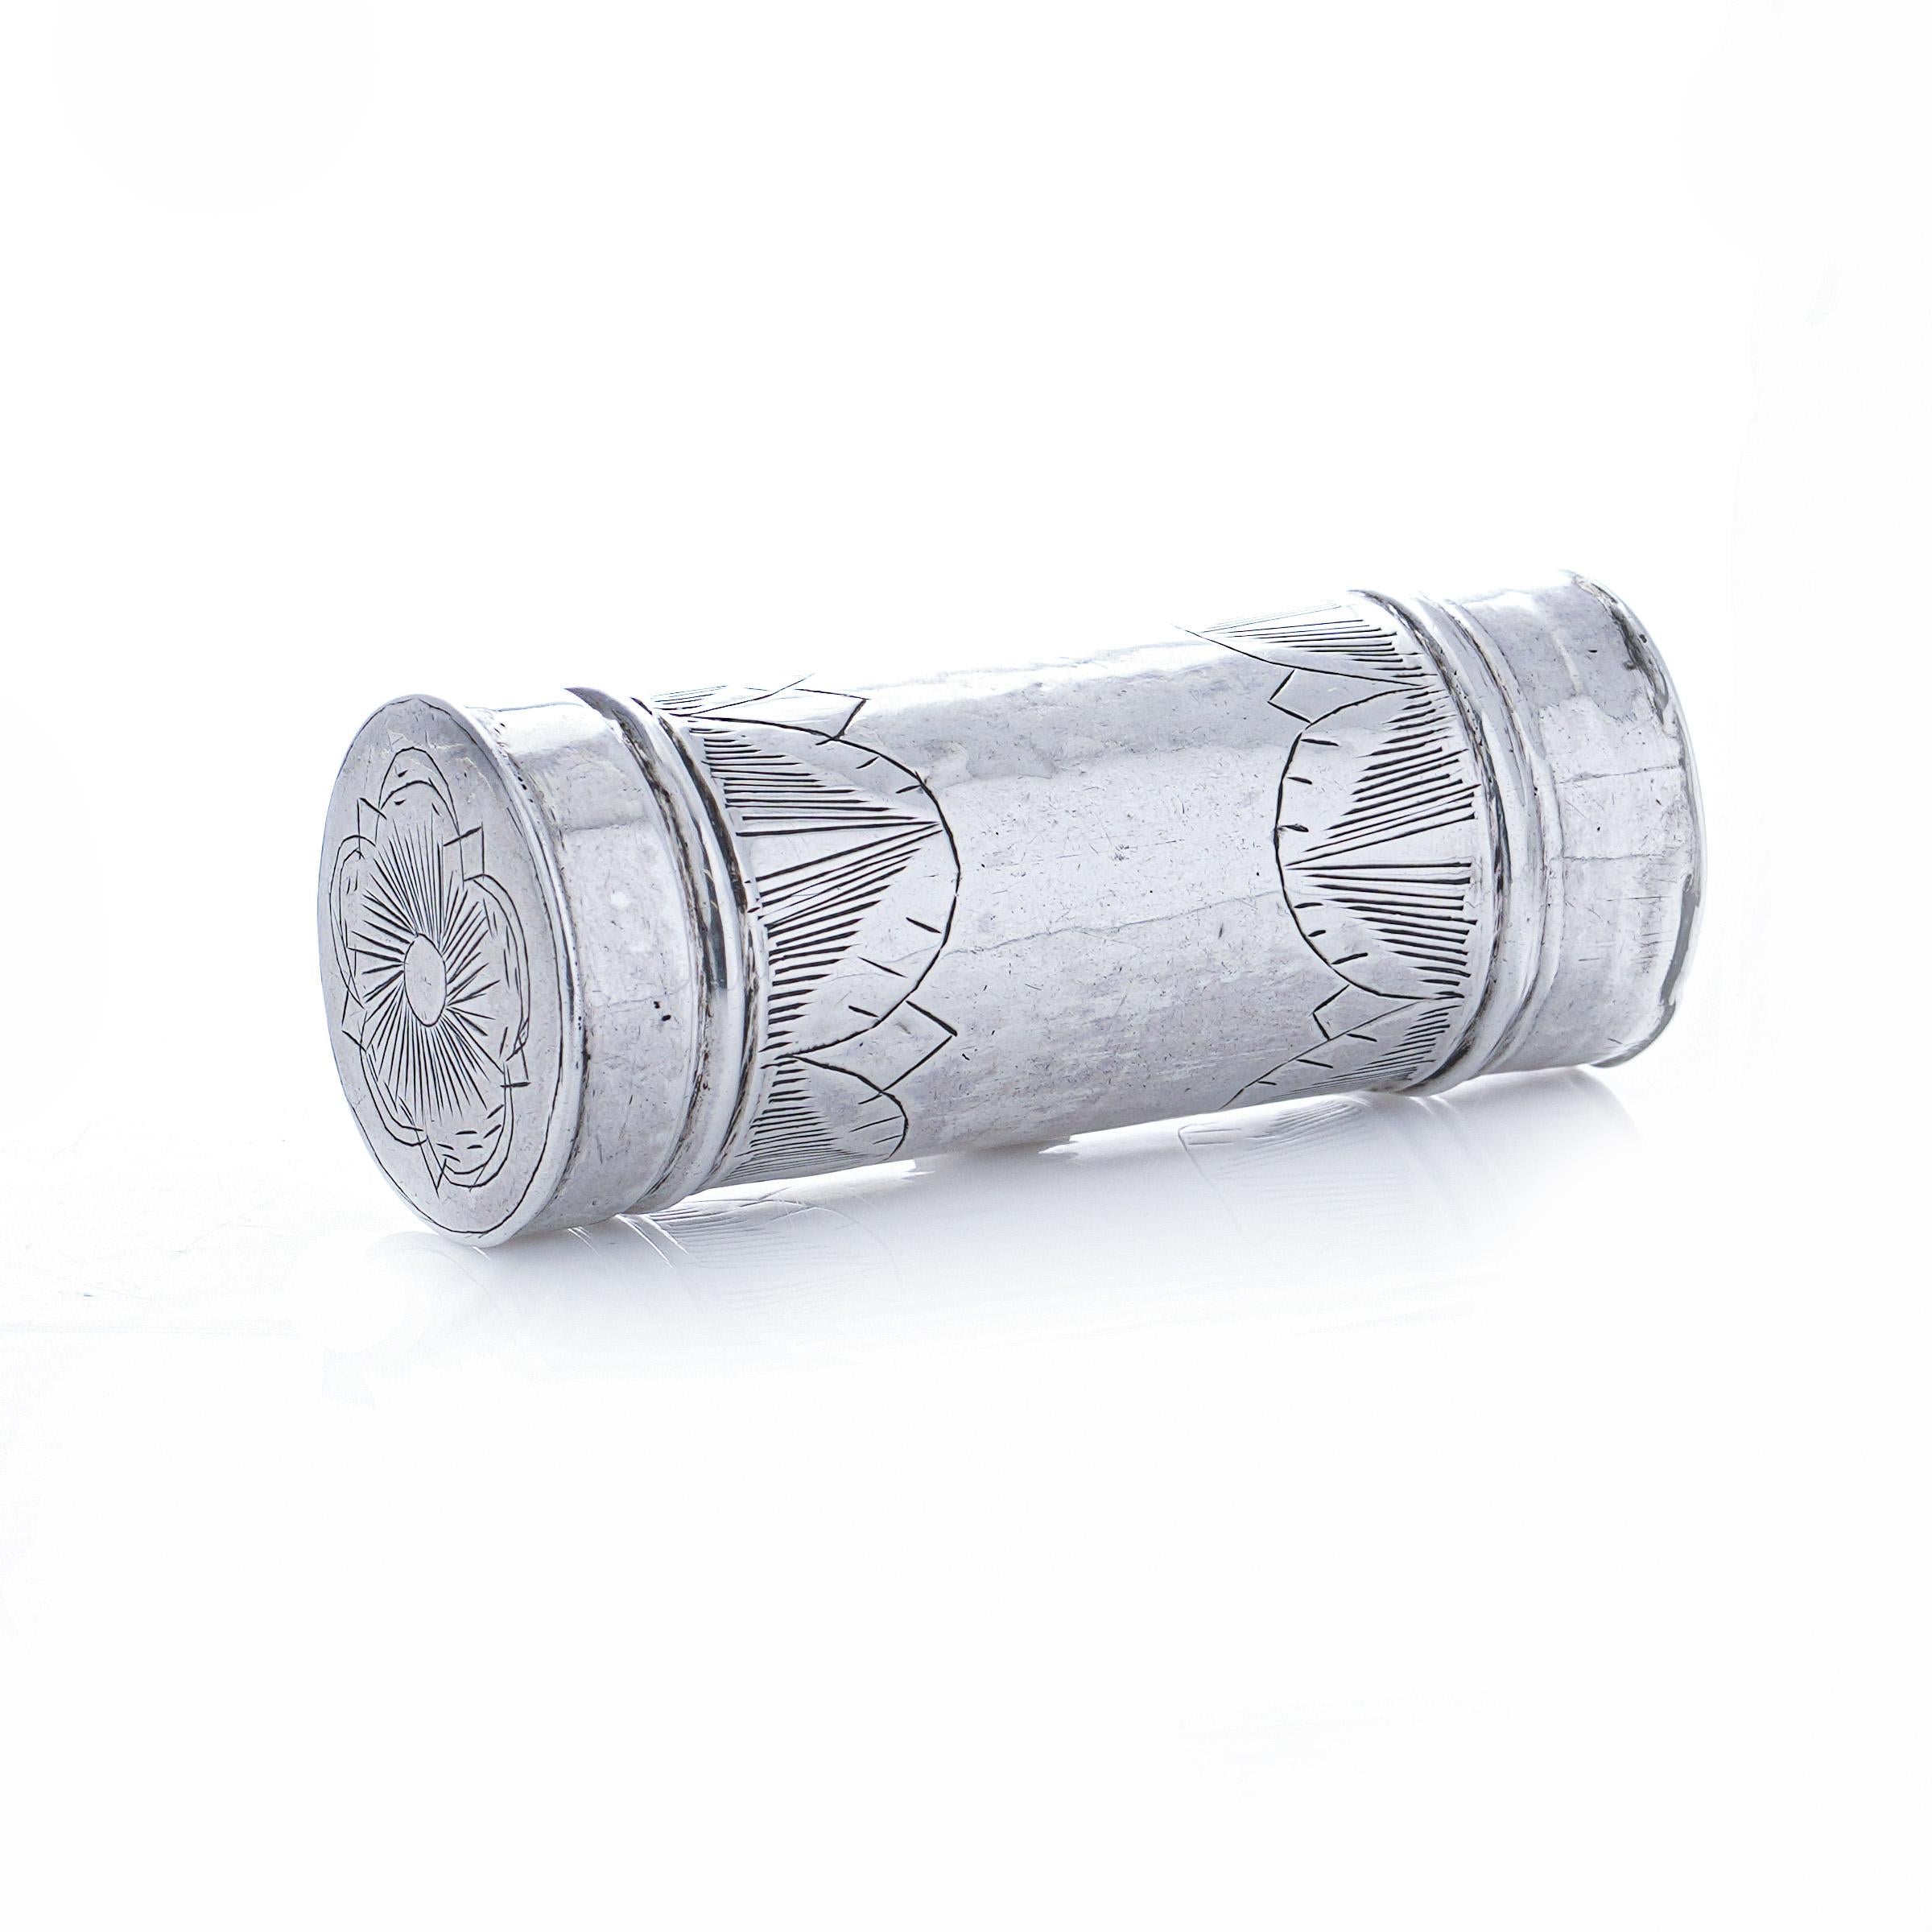 Antique 17th century sterling silver tubular nutmeg grater seamlessly blends functionality with historical charm. Crafted in England in 17th century, this exquisite item boasts a silver grater encased within its tube, while the removable lid is